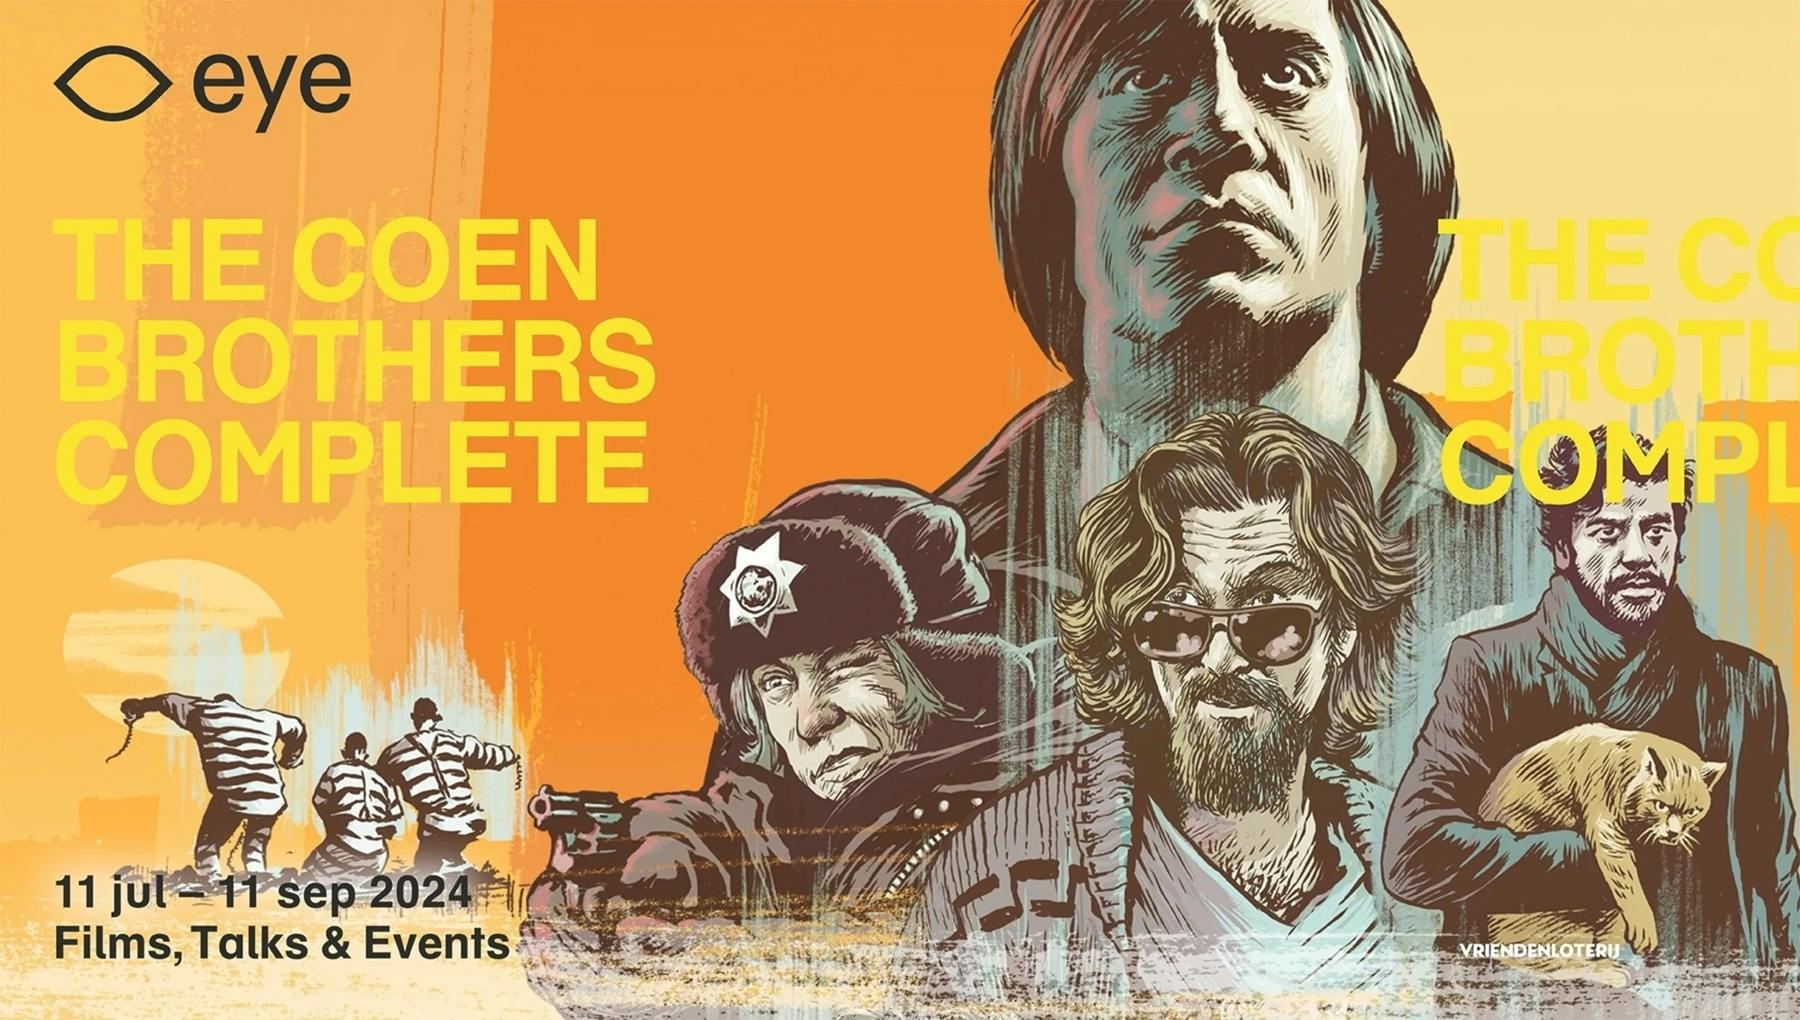 The Coen Brothers Complete